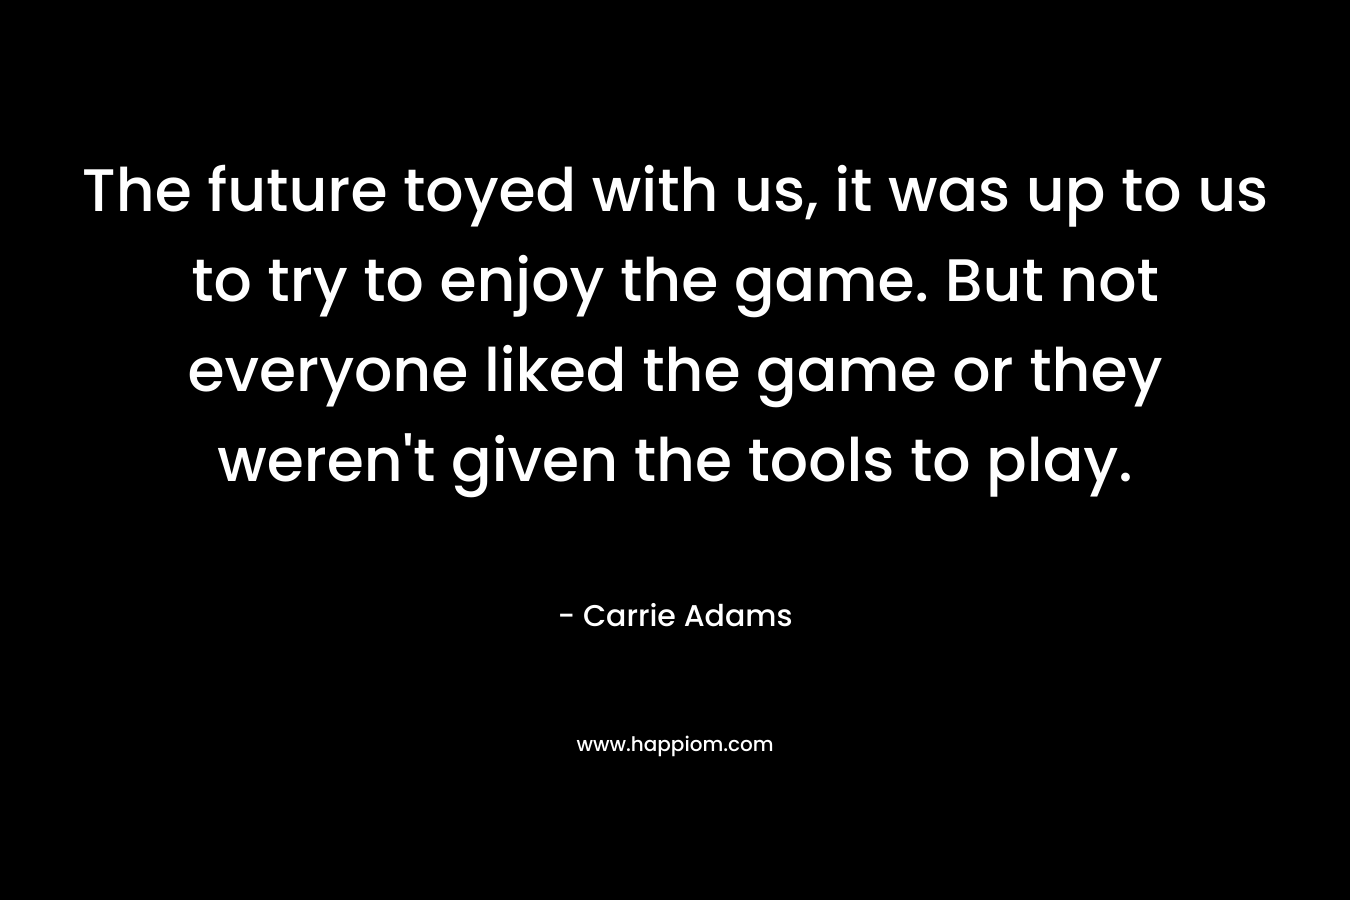 The future toyed with us, it was up to us to try to enjoy the game. But not everyone liked the game or they weren’t given the tools to play. – Carrie Adams